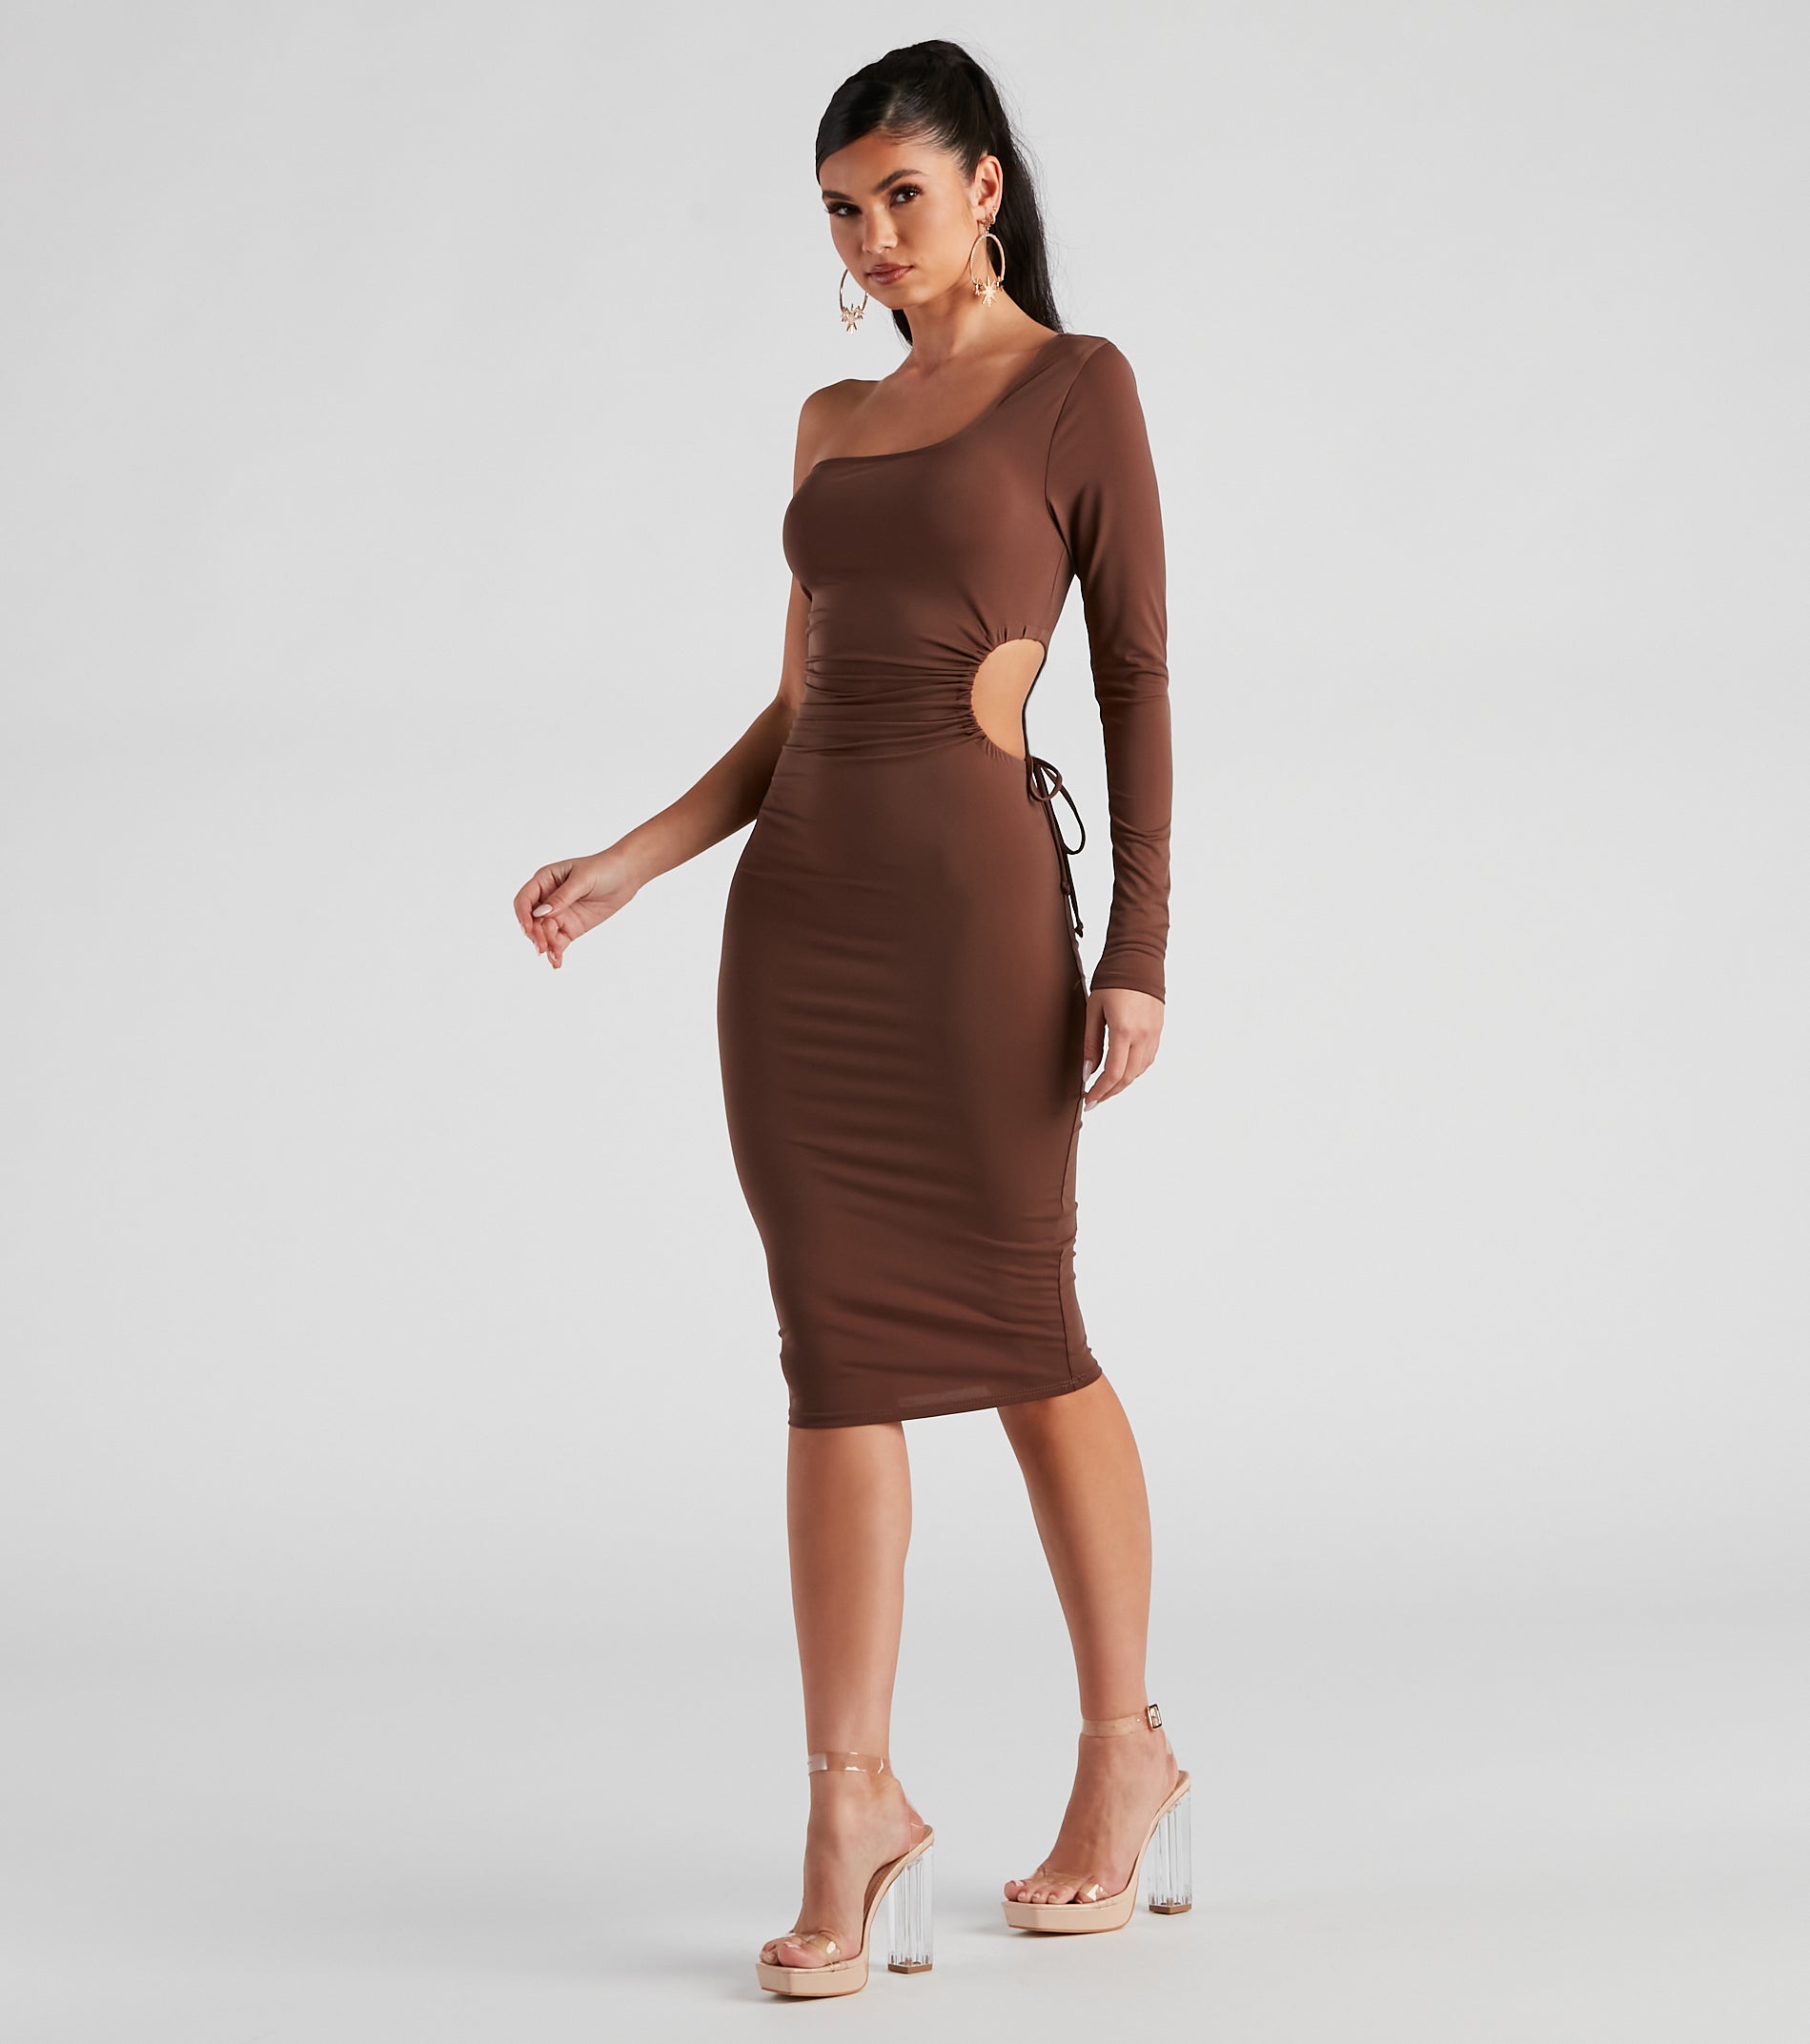 All About Fab Strappy Back Dress